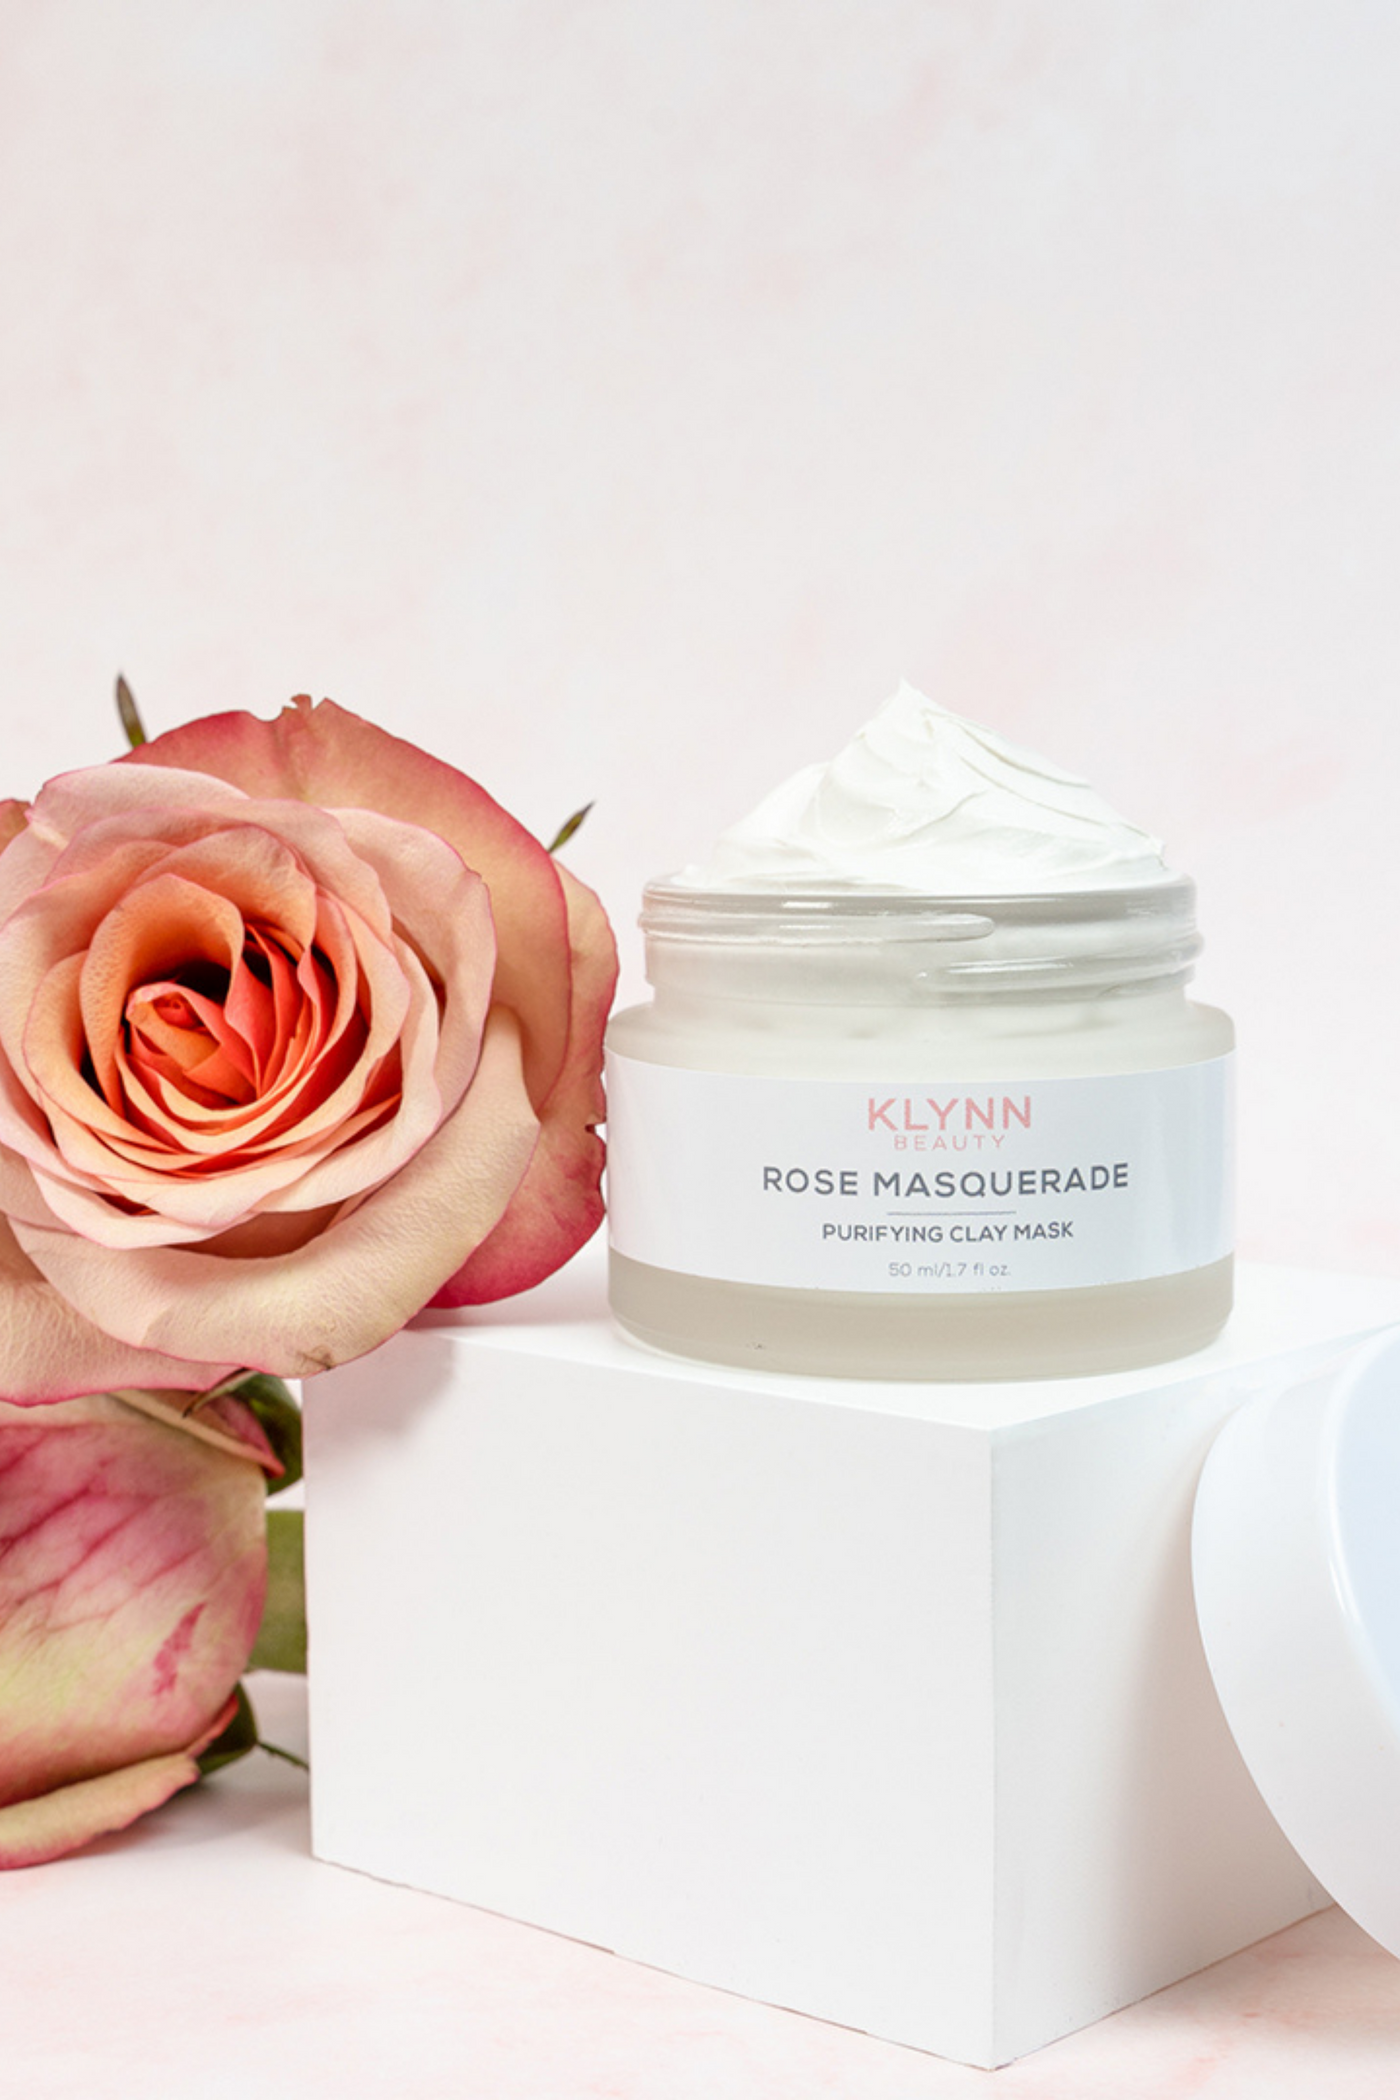 Klynn Beauty Rose Masquerade Purifying Clay Mask, available on ZERRIN with free Singapore shipping